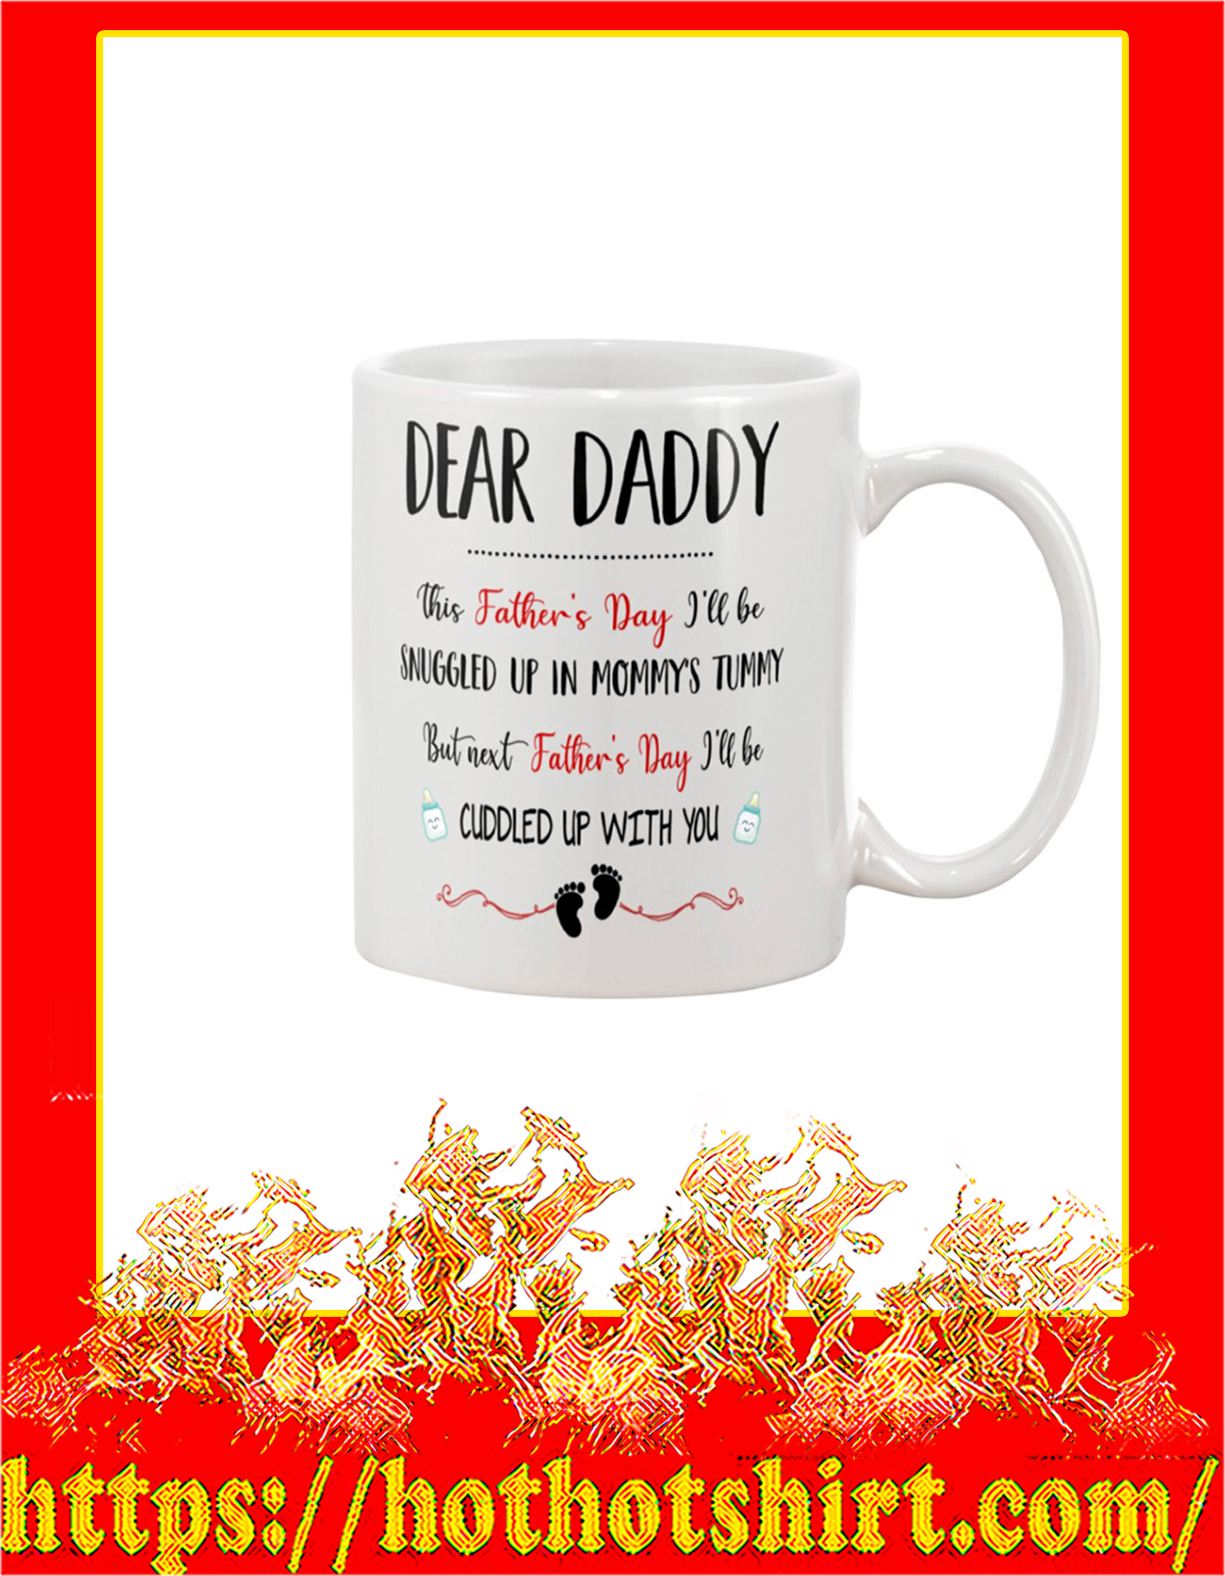 Dear daddy this father’s day I’ll be snuggled up in momy’s tummy mug